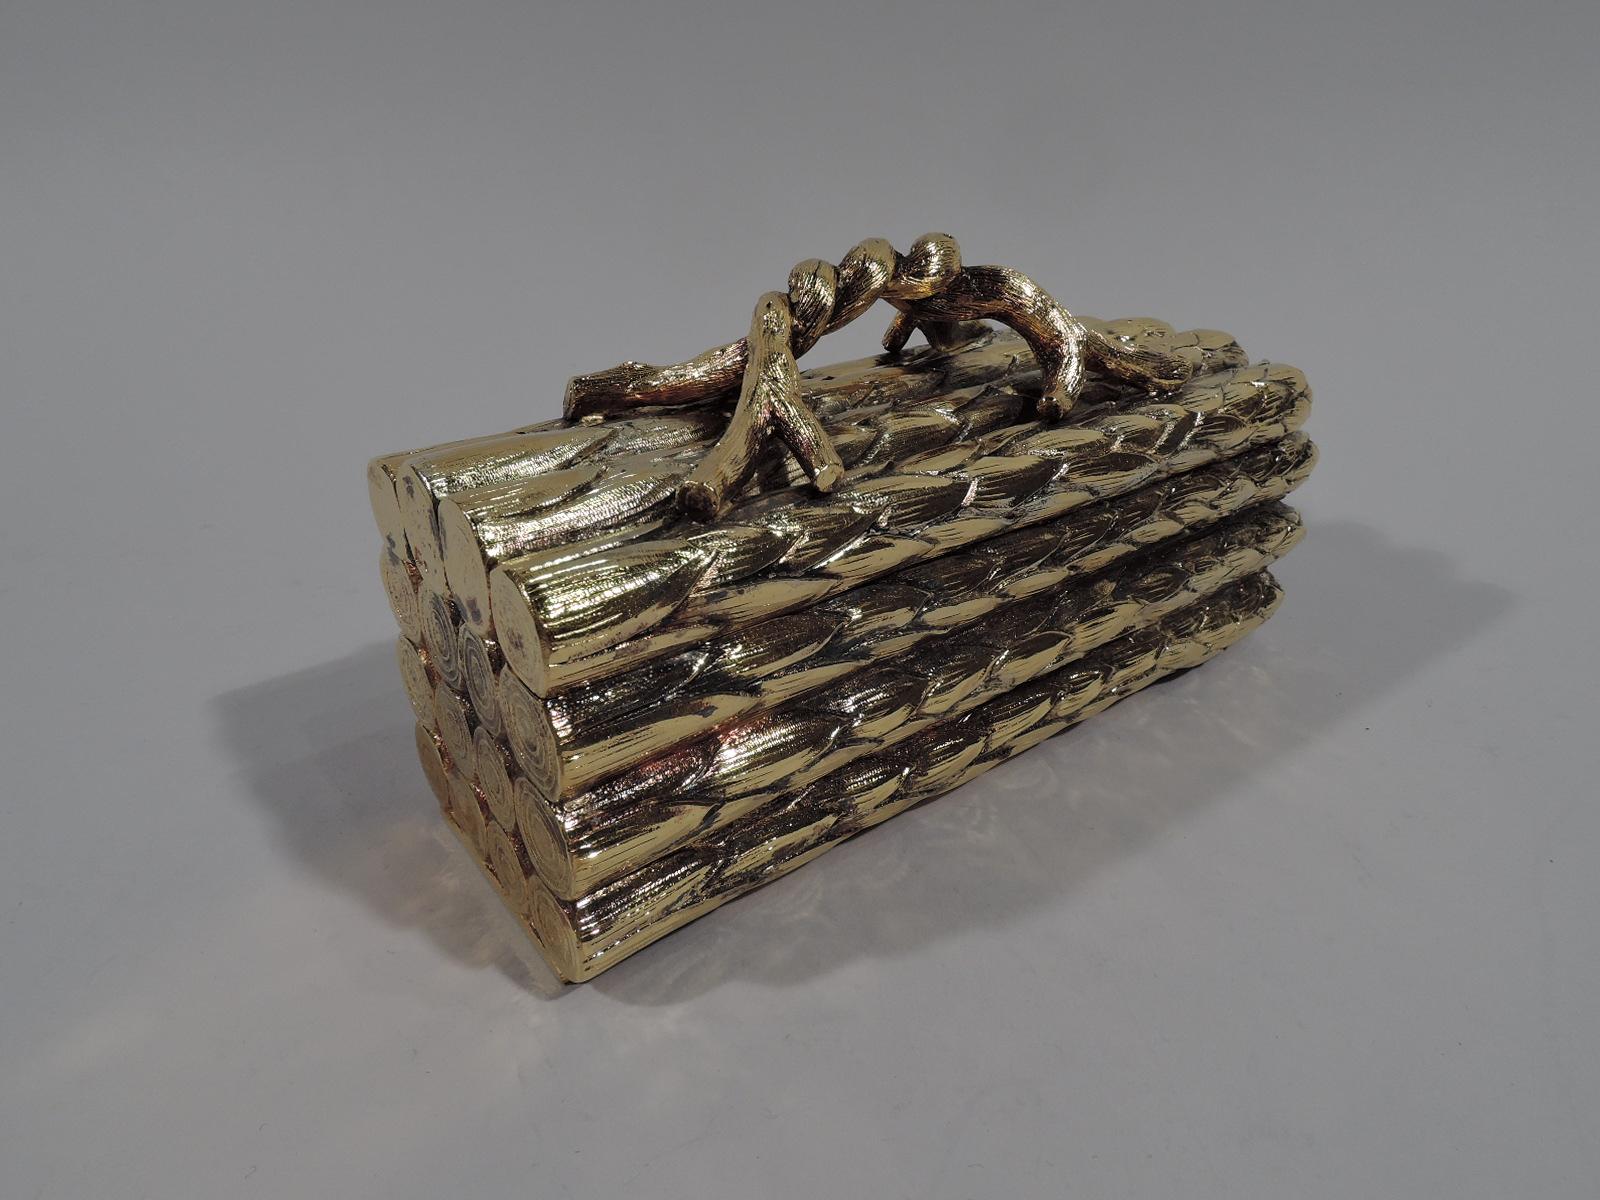 Figural gilt sterling silver box. Retailed by Tiffany & Co. in New York. In form of neatly aligned asparagus stalks, the ends bluntly cut. Twisted wood stem handle. Jokey novelty. Marked “Tiffany & Co. / Sterling / Portugal”. 

Overall dimensions: